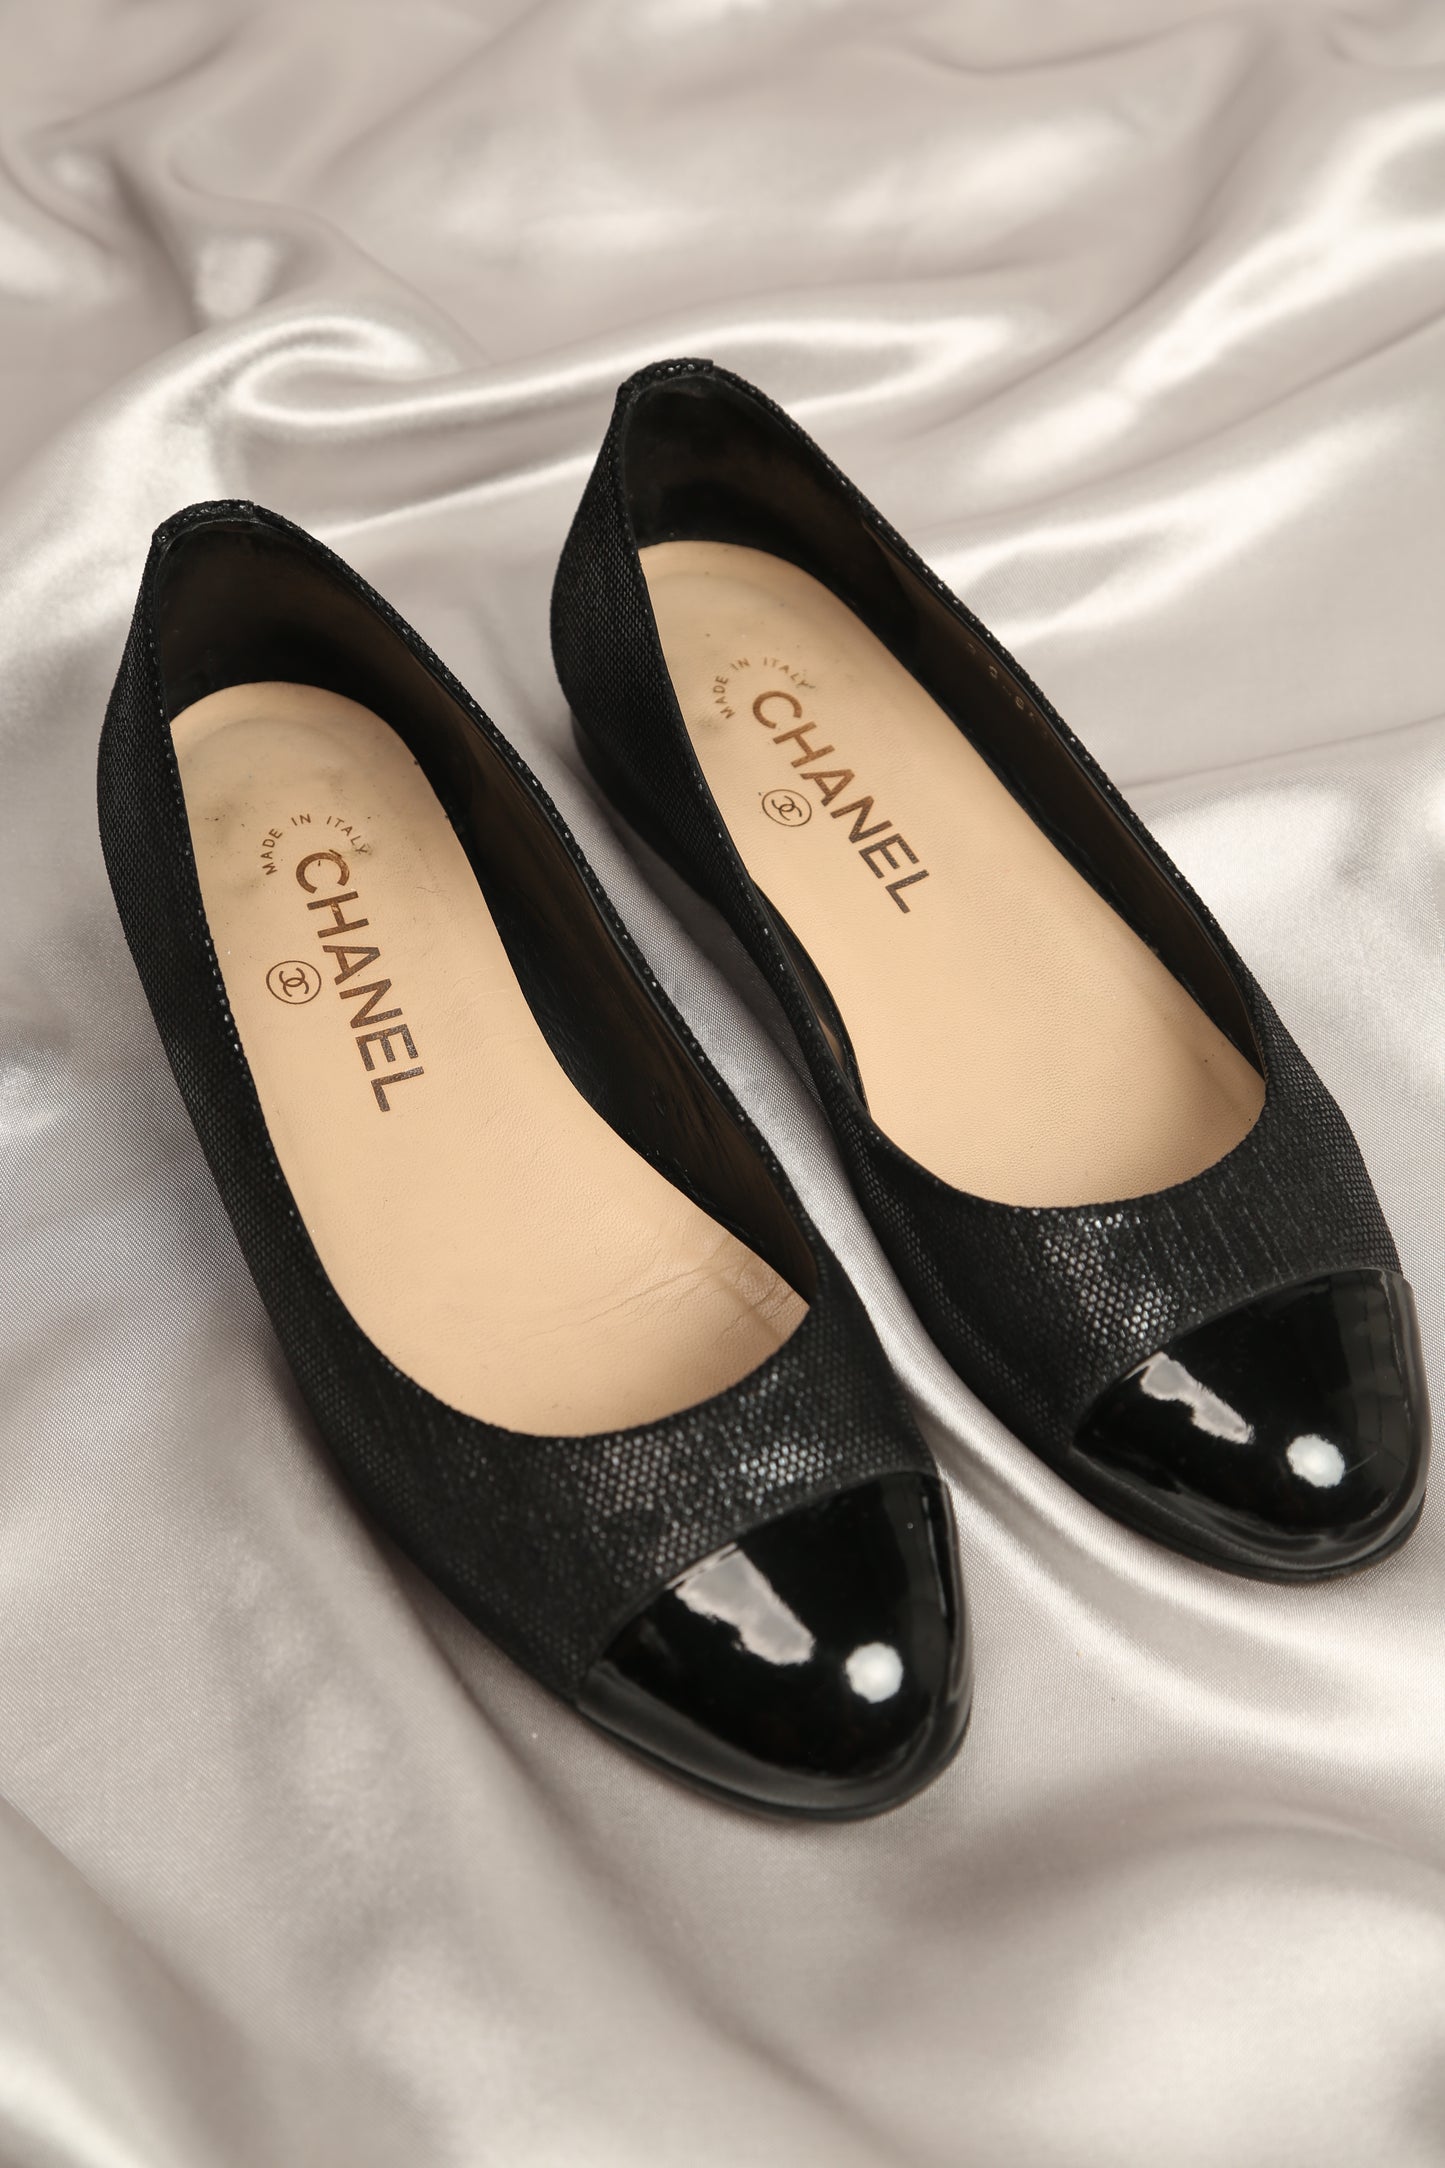 Extremely Rare CHANEL Ballet Flats